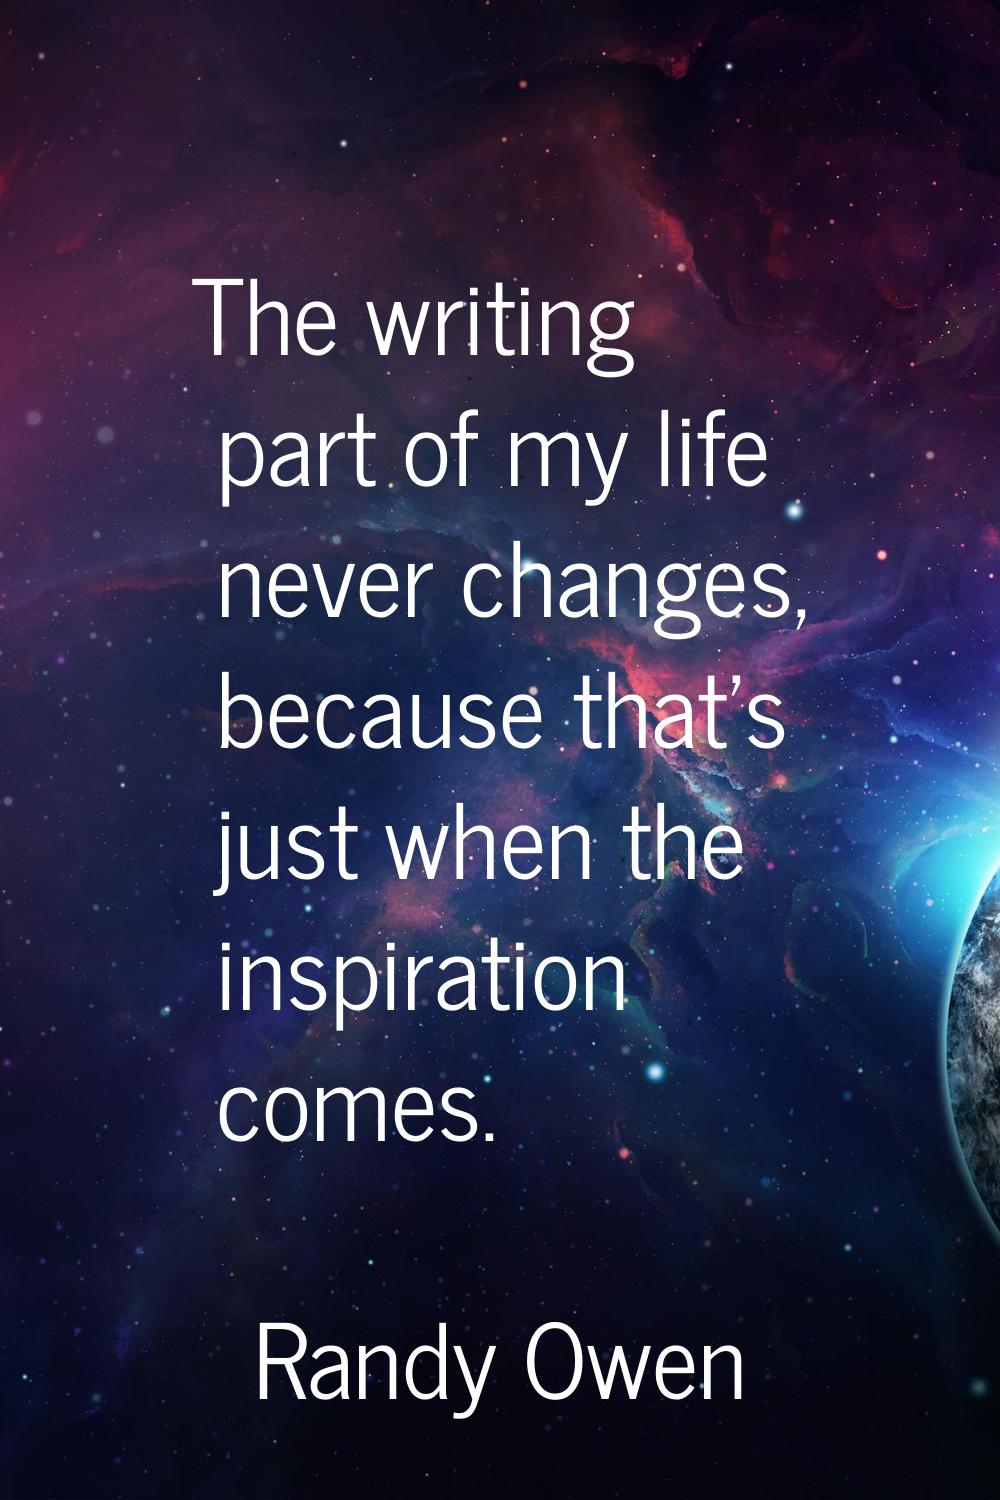 The writing part of my life never changes, because that's just when the inspiration comes.